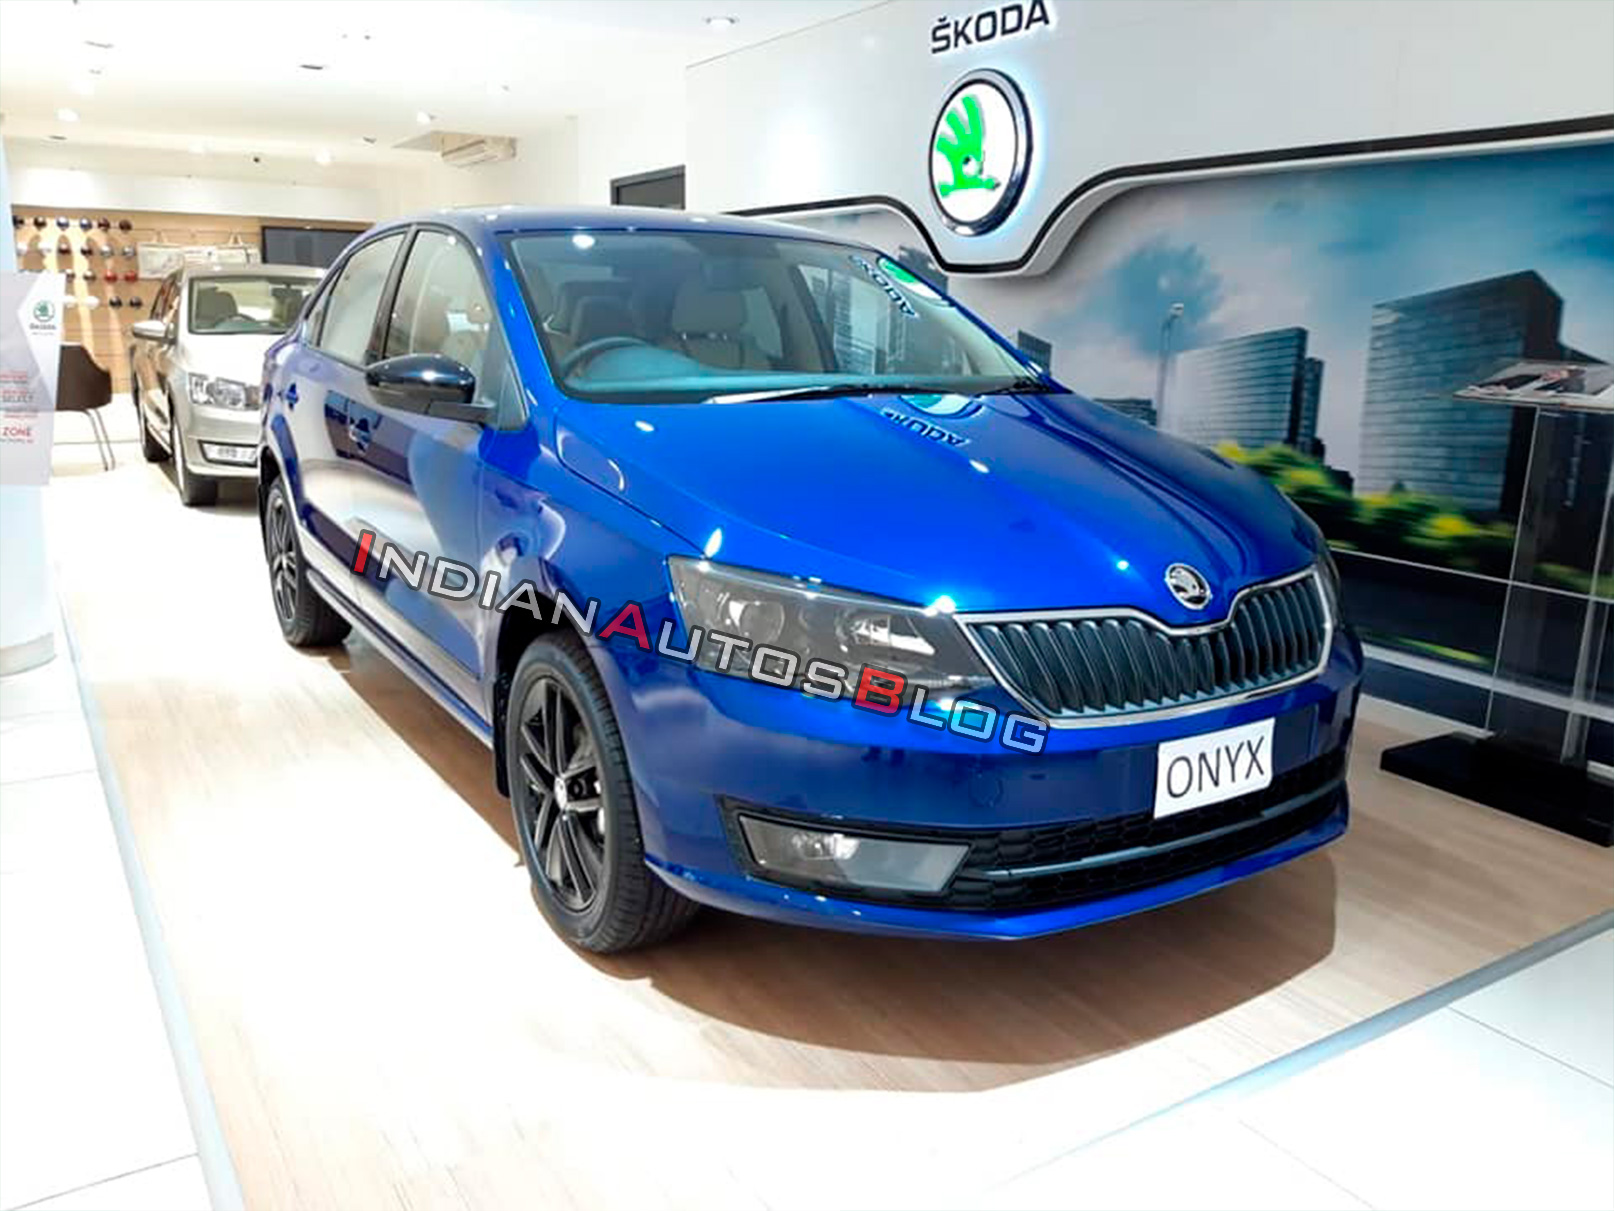 Skoda Rapid Onyx Launched In India In 7 Live Images